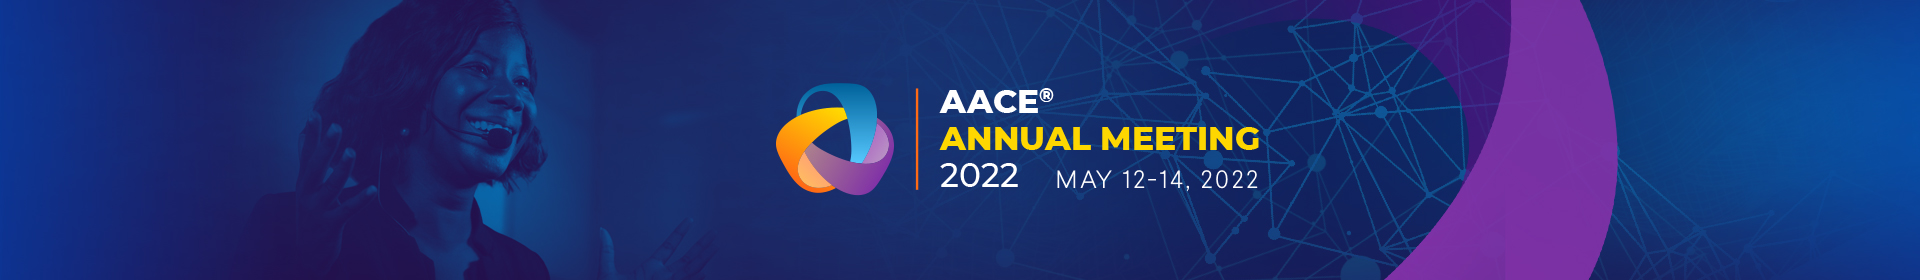 AACE 2022 Annual Conference Event Banner